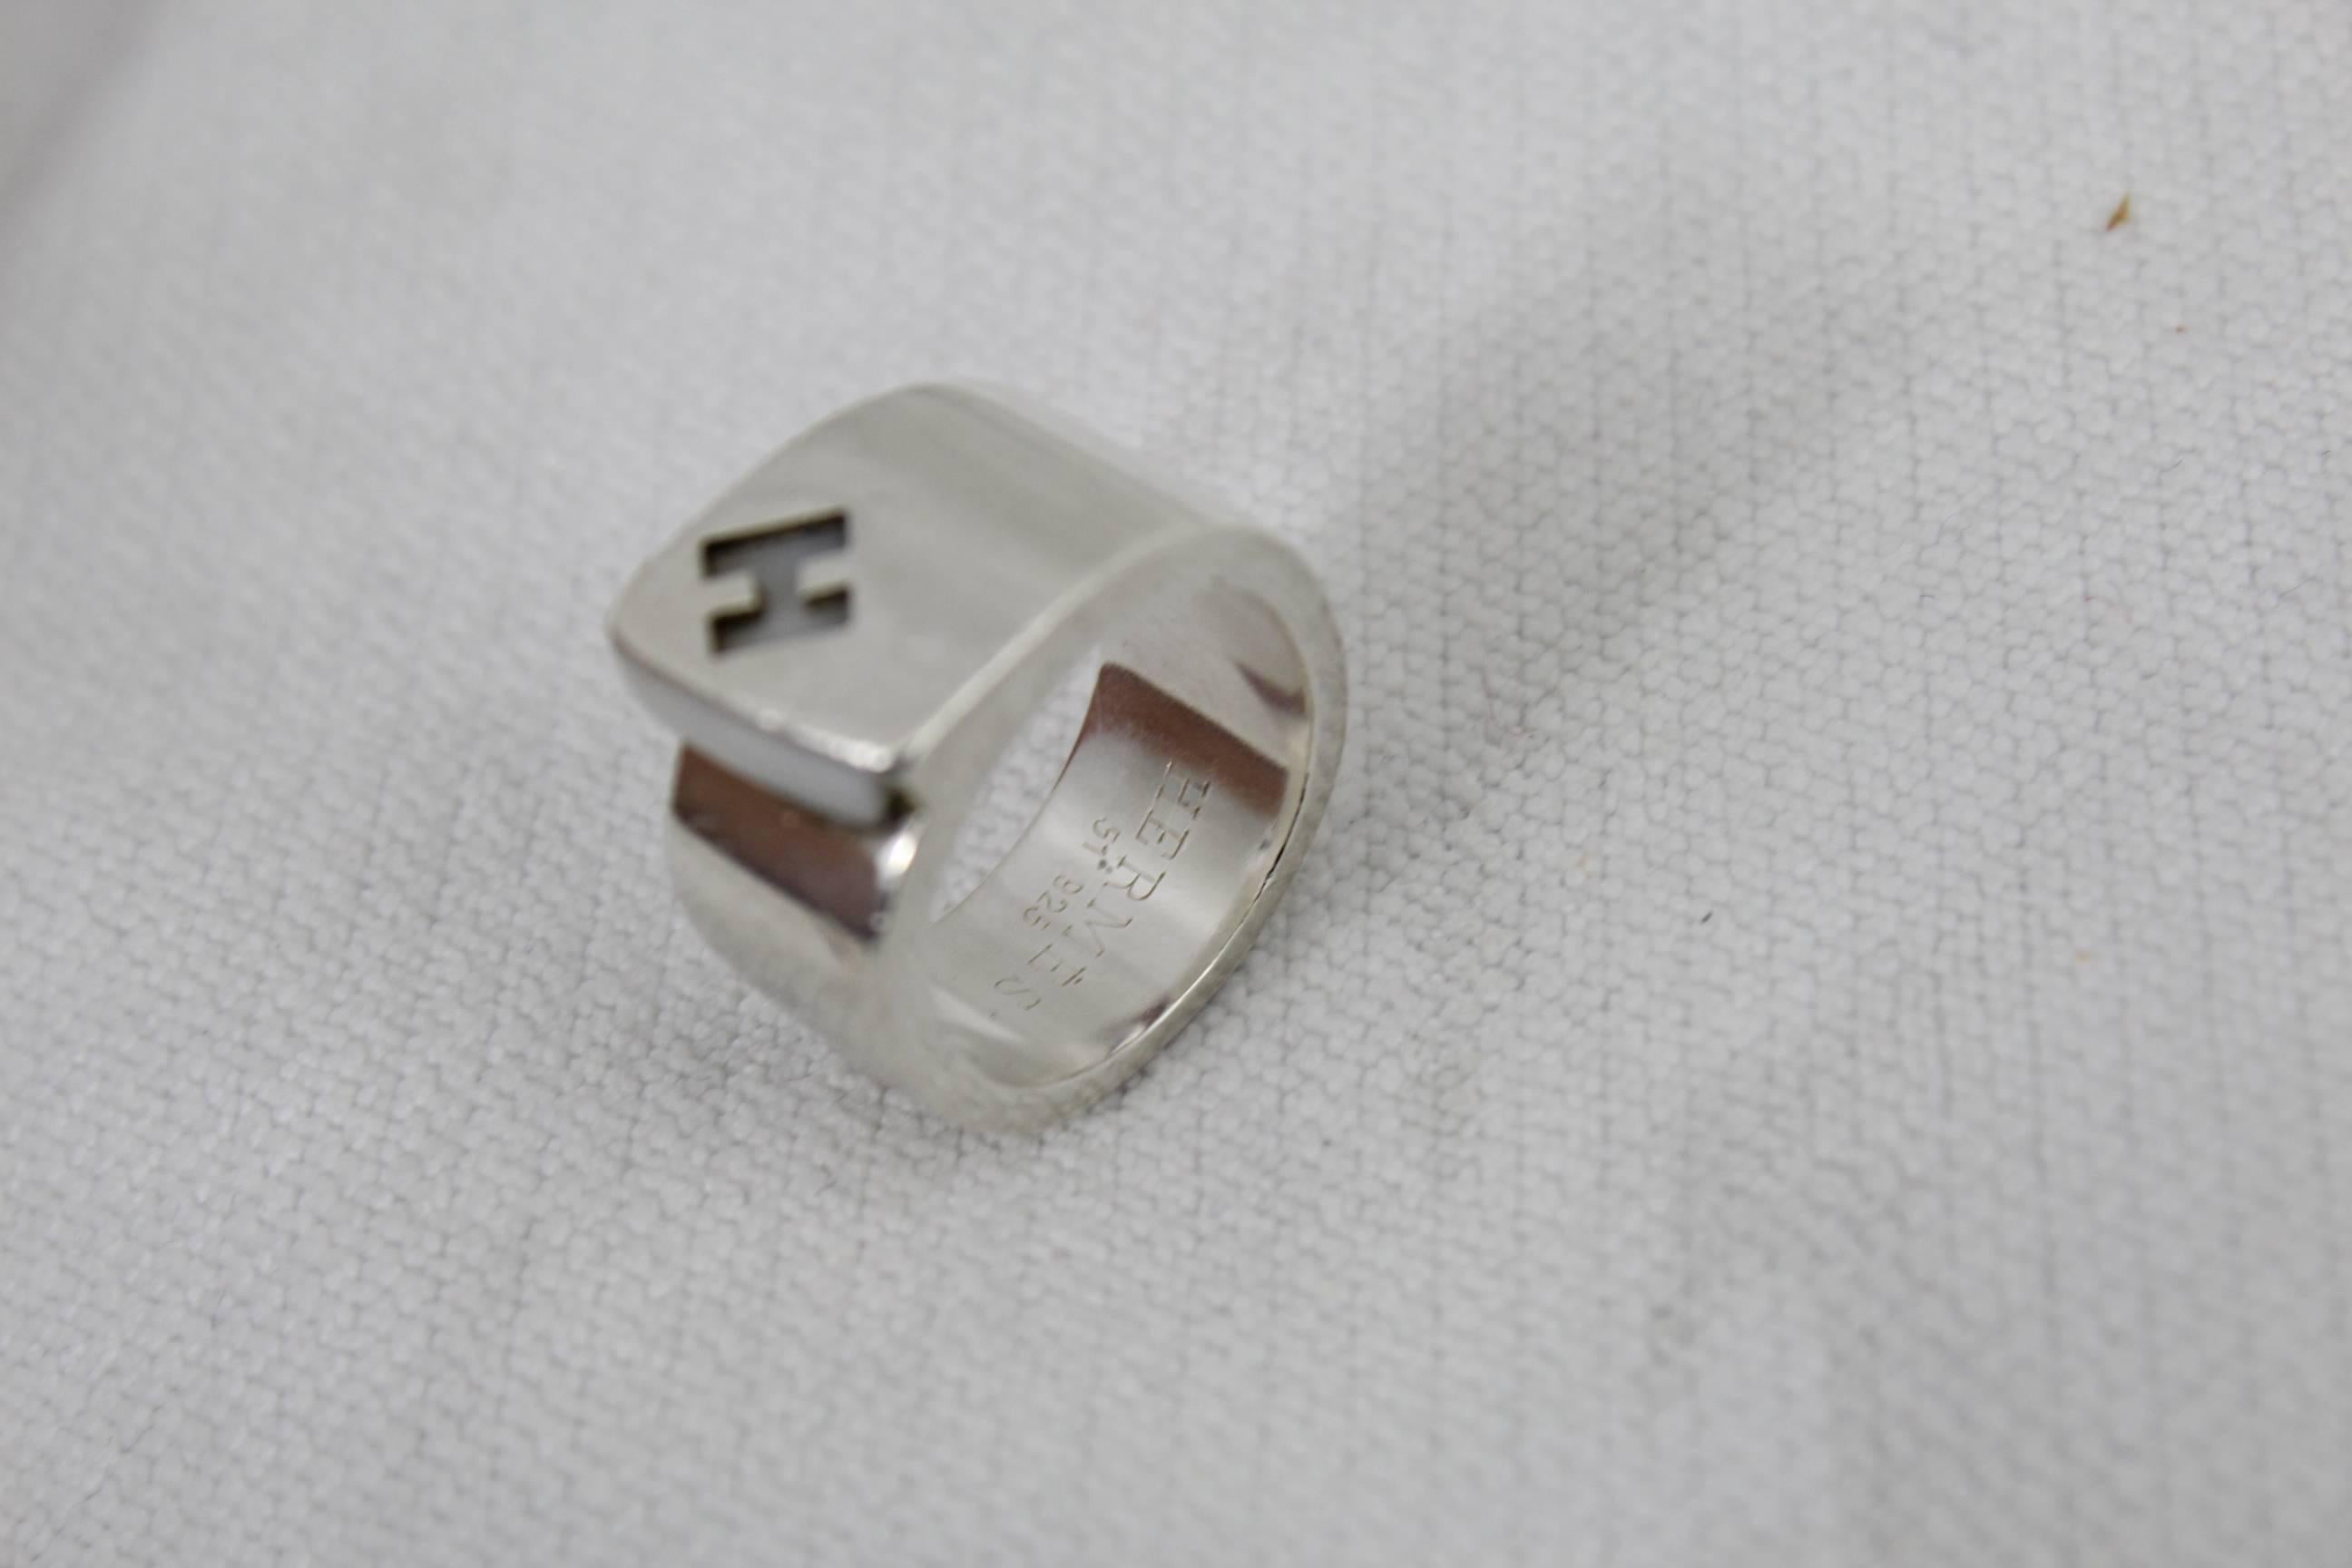 Hermes Candy ring in sterling silve. Size french 51.

good condition, some small signs of wear